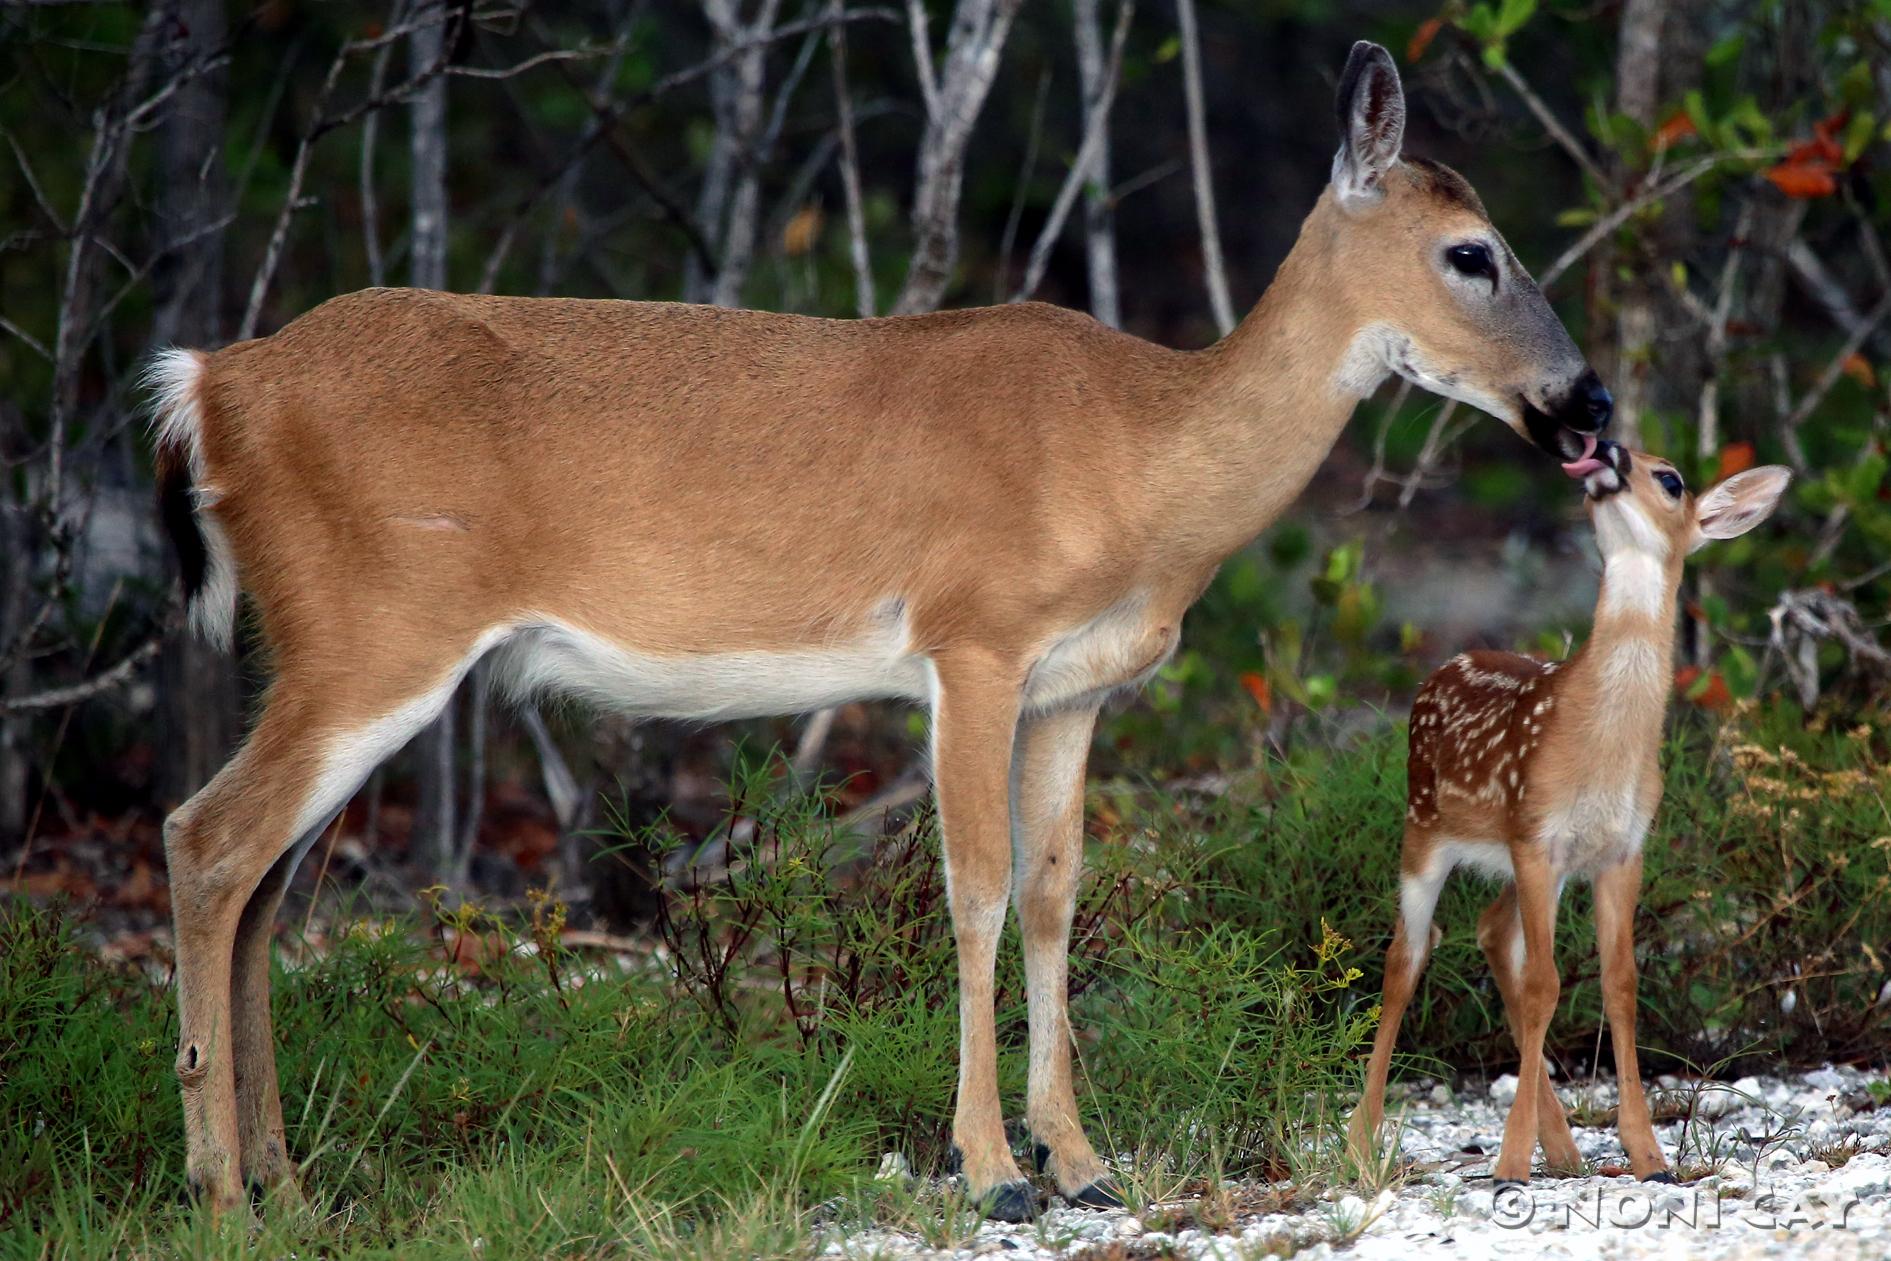 Key Deer Fawn | Noni Cay Photography